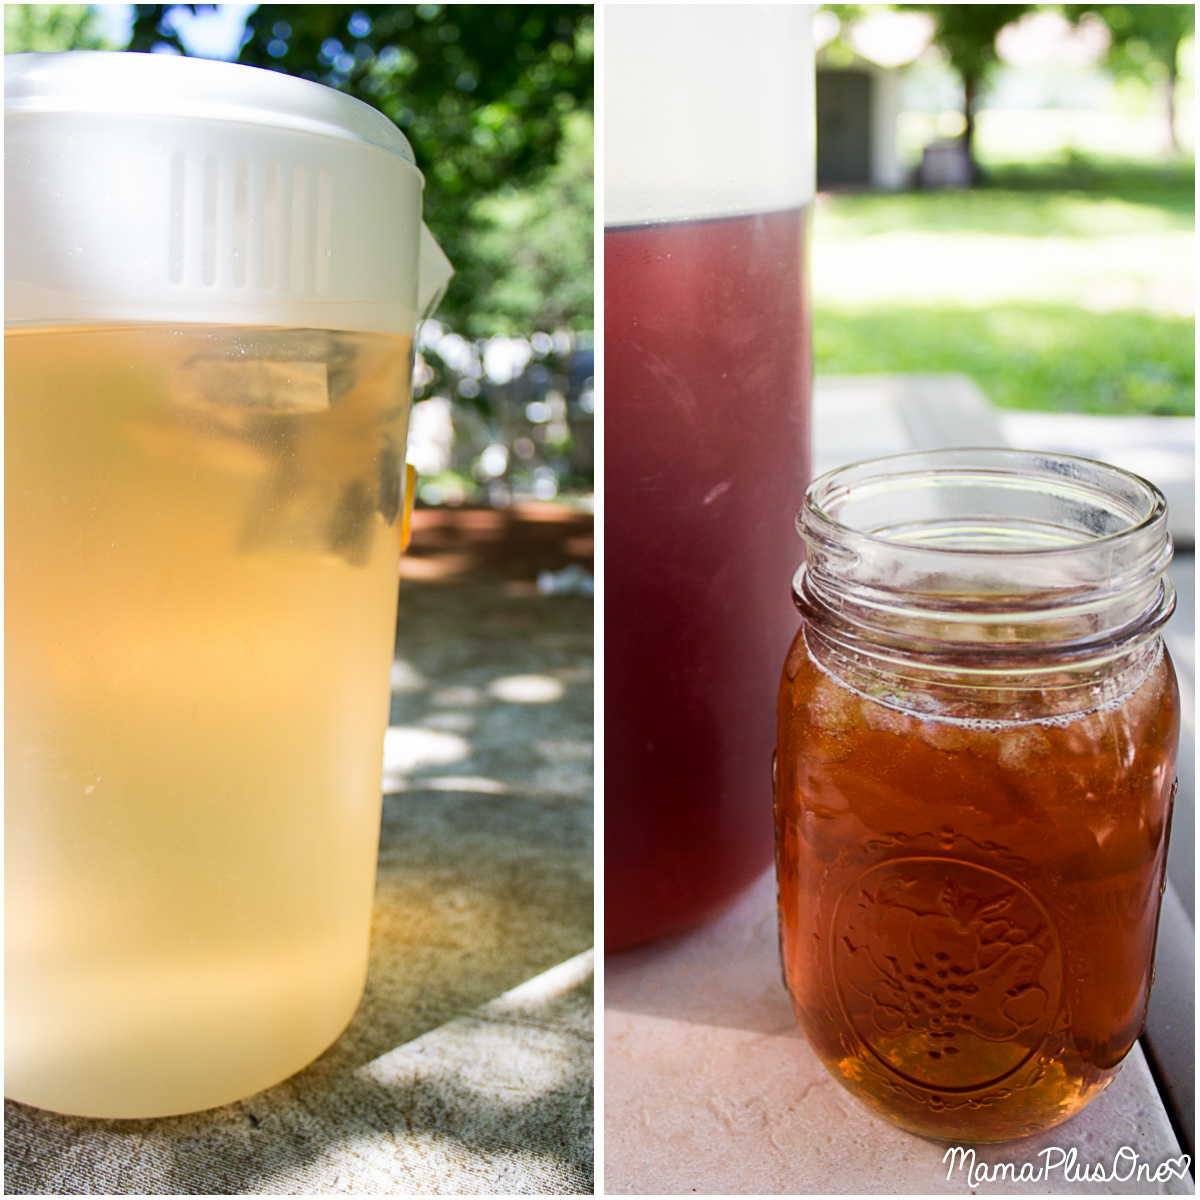 Nothing refreshes quite like sweet sun tea in the summer. It's SO easy to make-- with just 2 ingredients and some water! Make summer a little bit sweeter with this refreshing beverage.